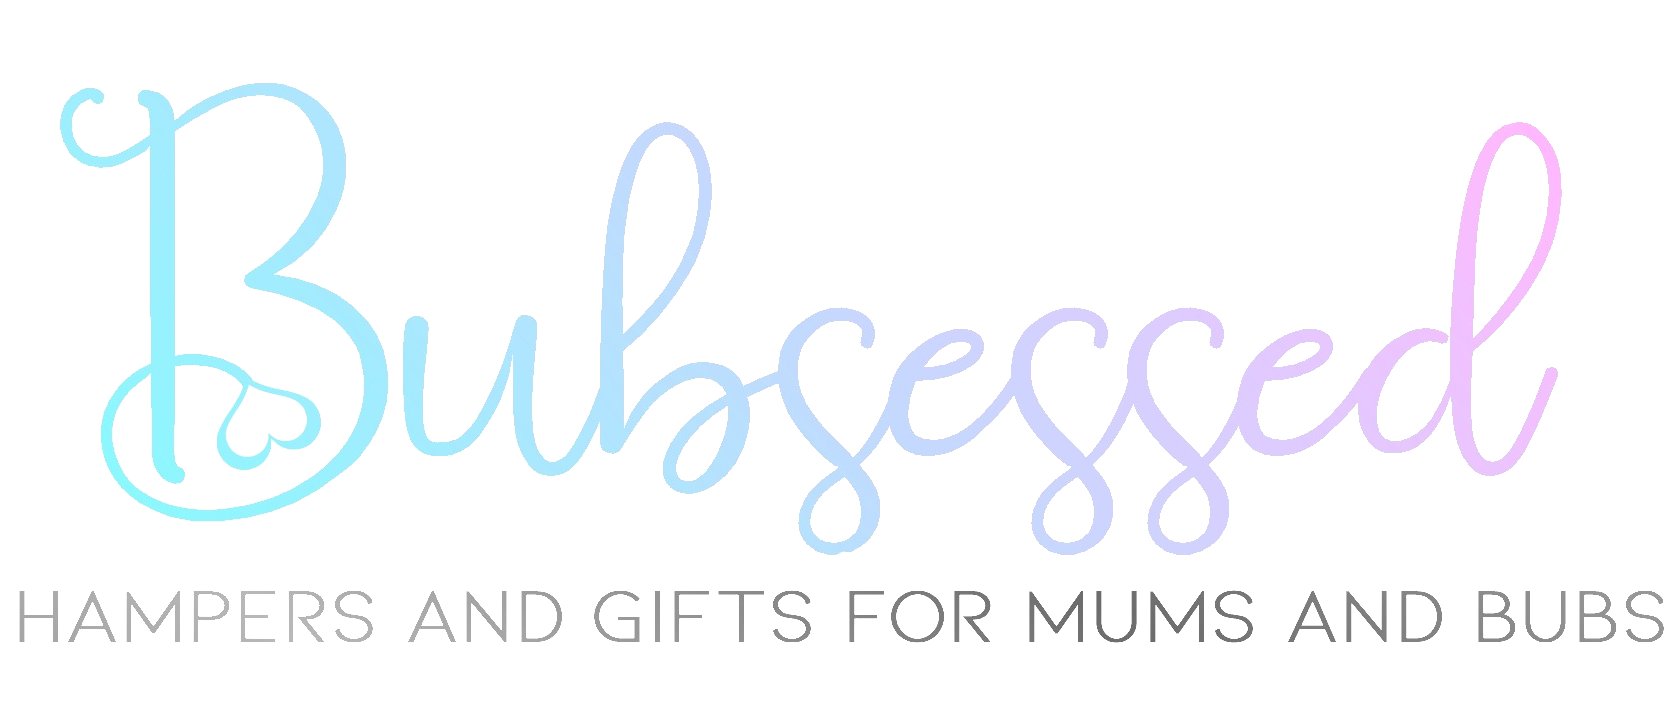 Bubsessed logo